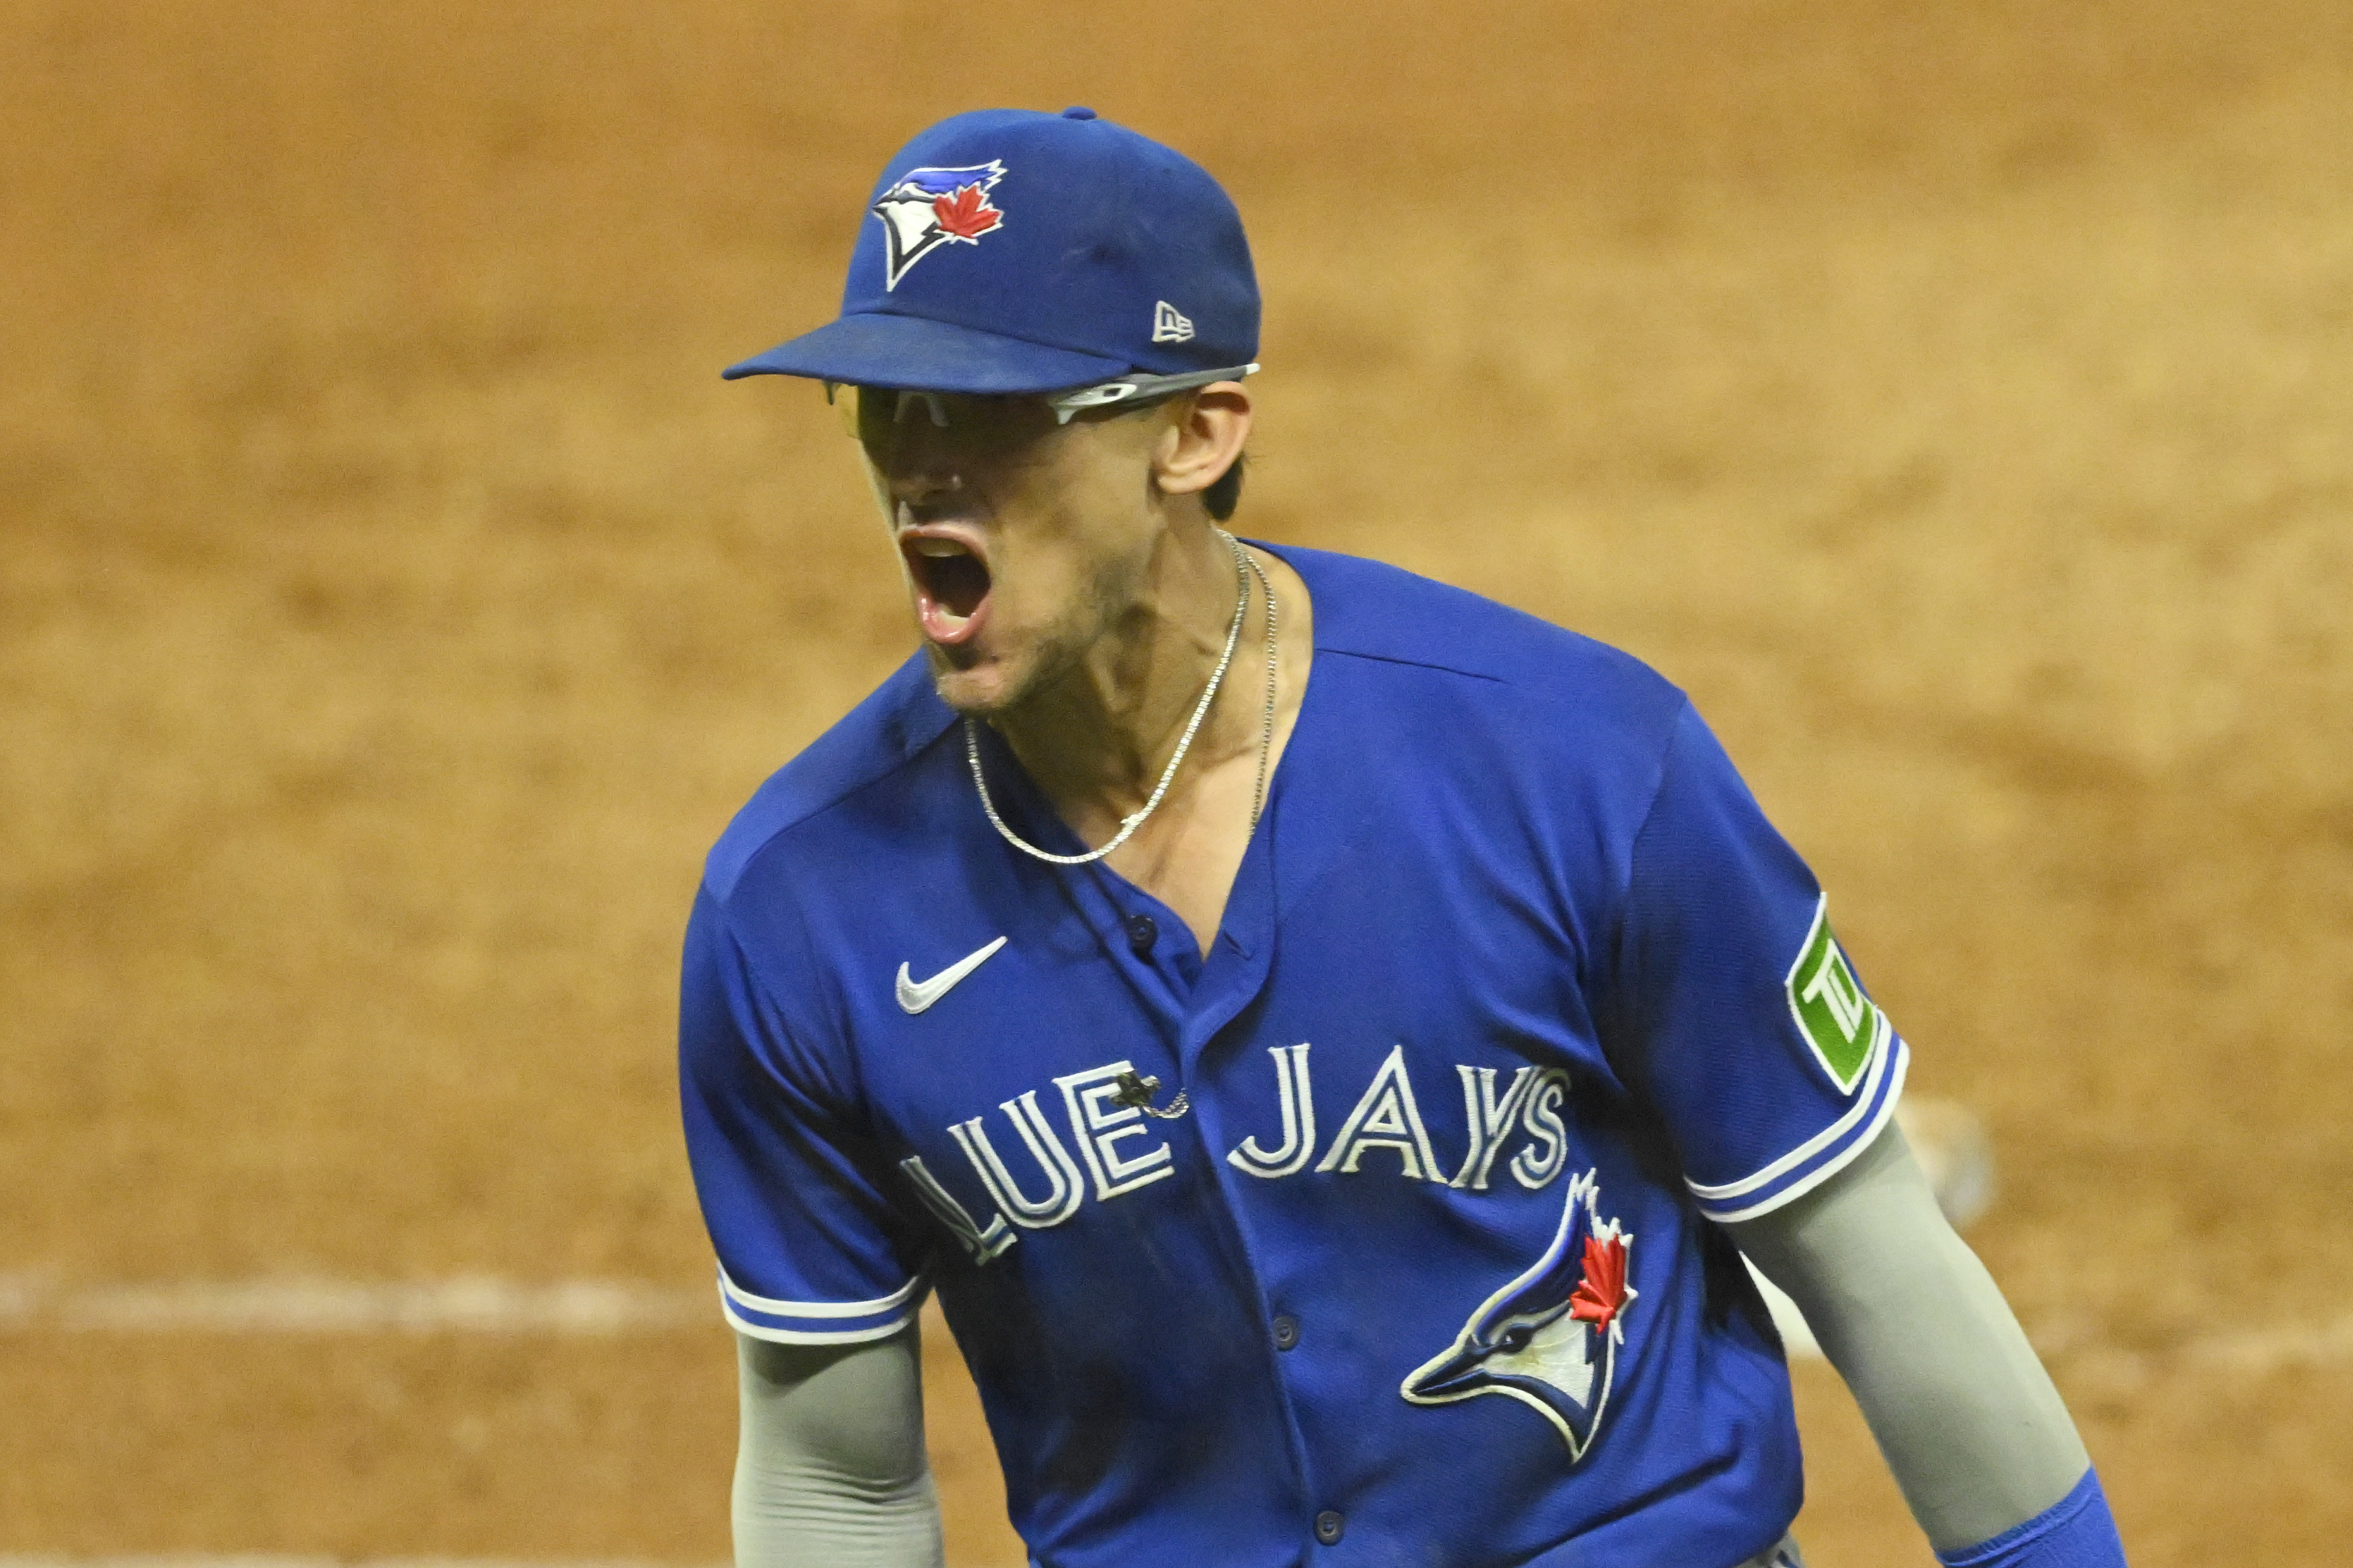 Biggio hits two-run homer in 8th as Blue Jays beat Guardians 3-1